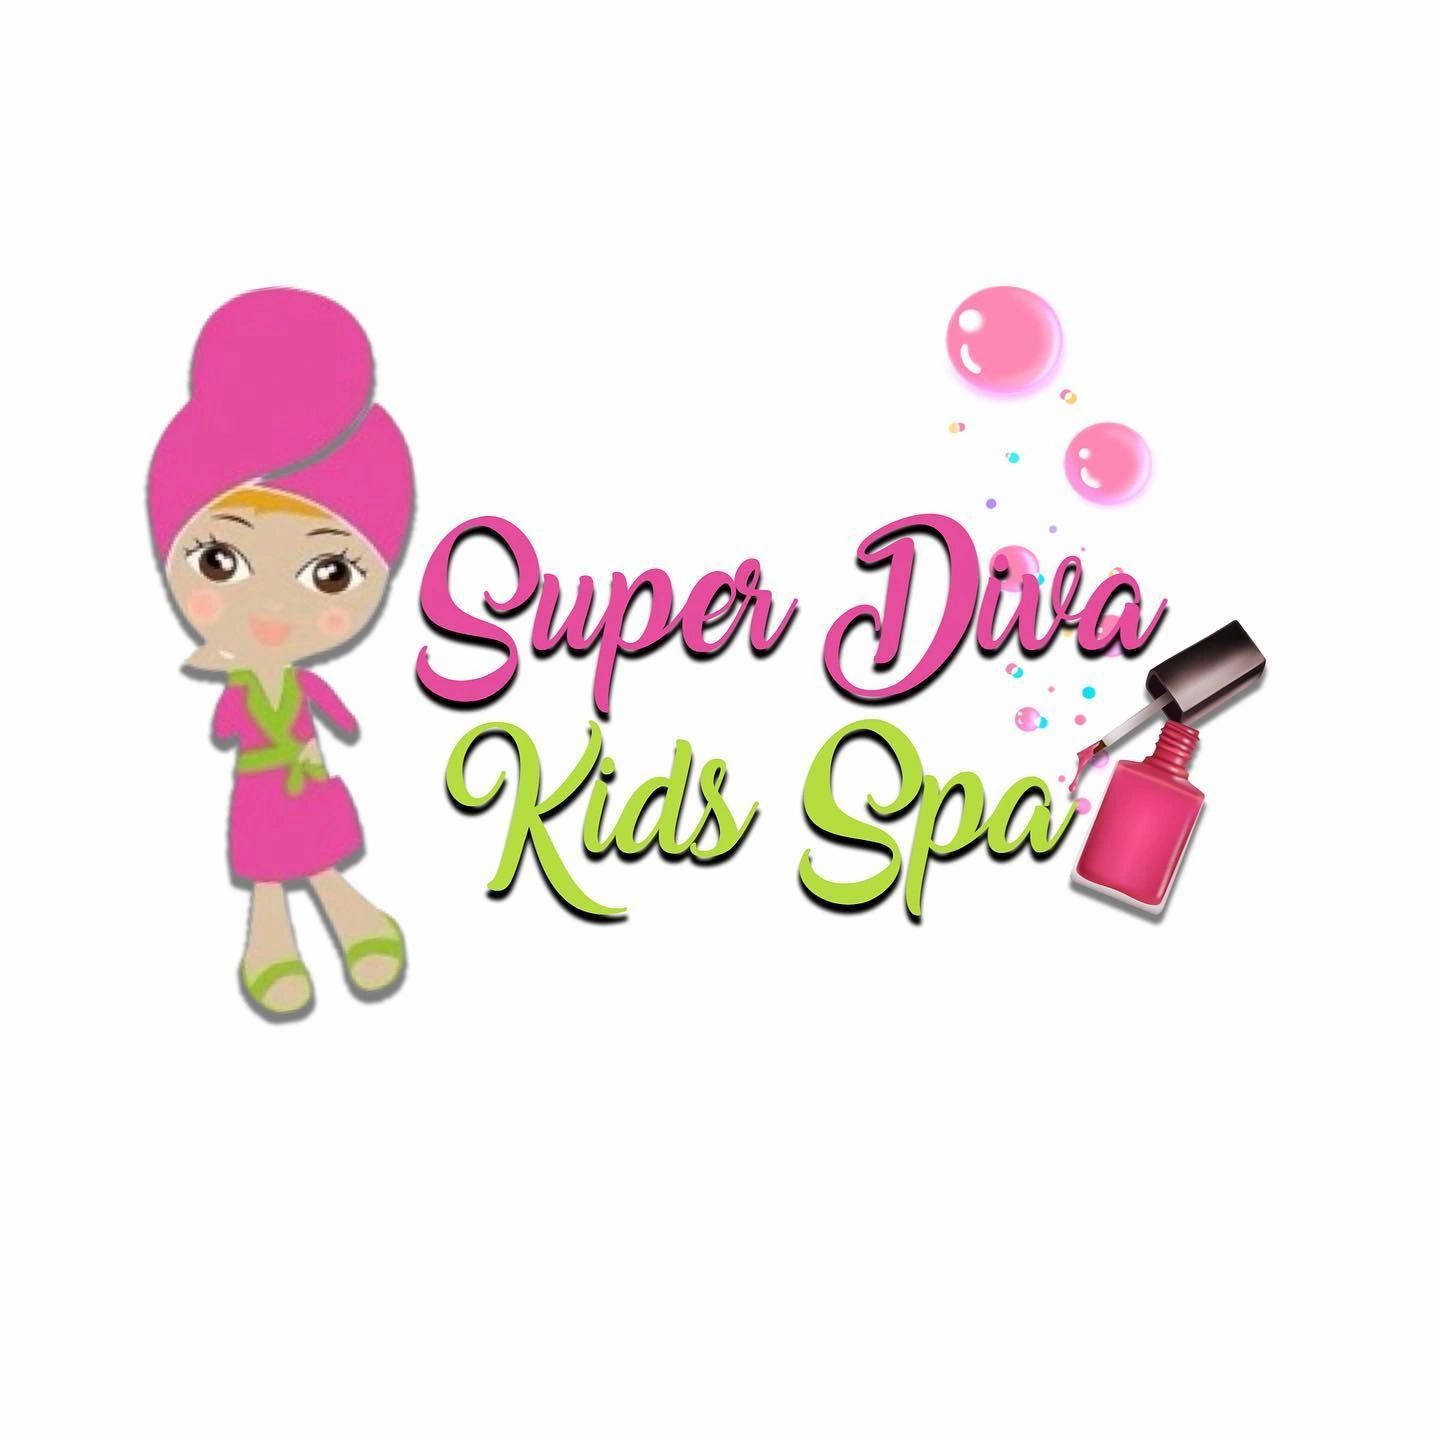 Super Diva Kid's Spa Spa Party Girls, Kid's Spa, Spa Party